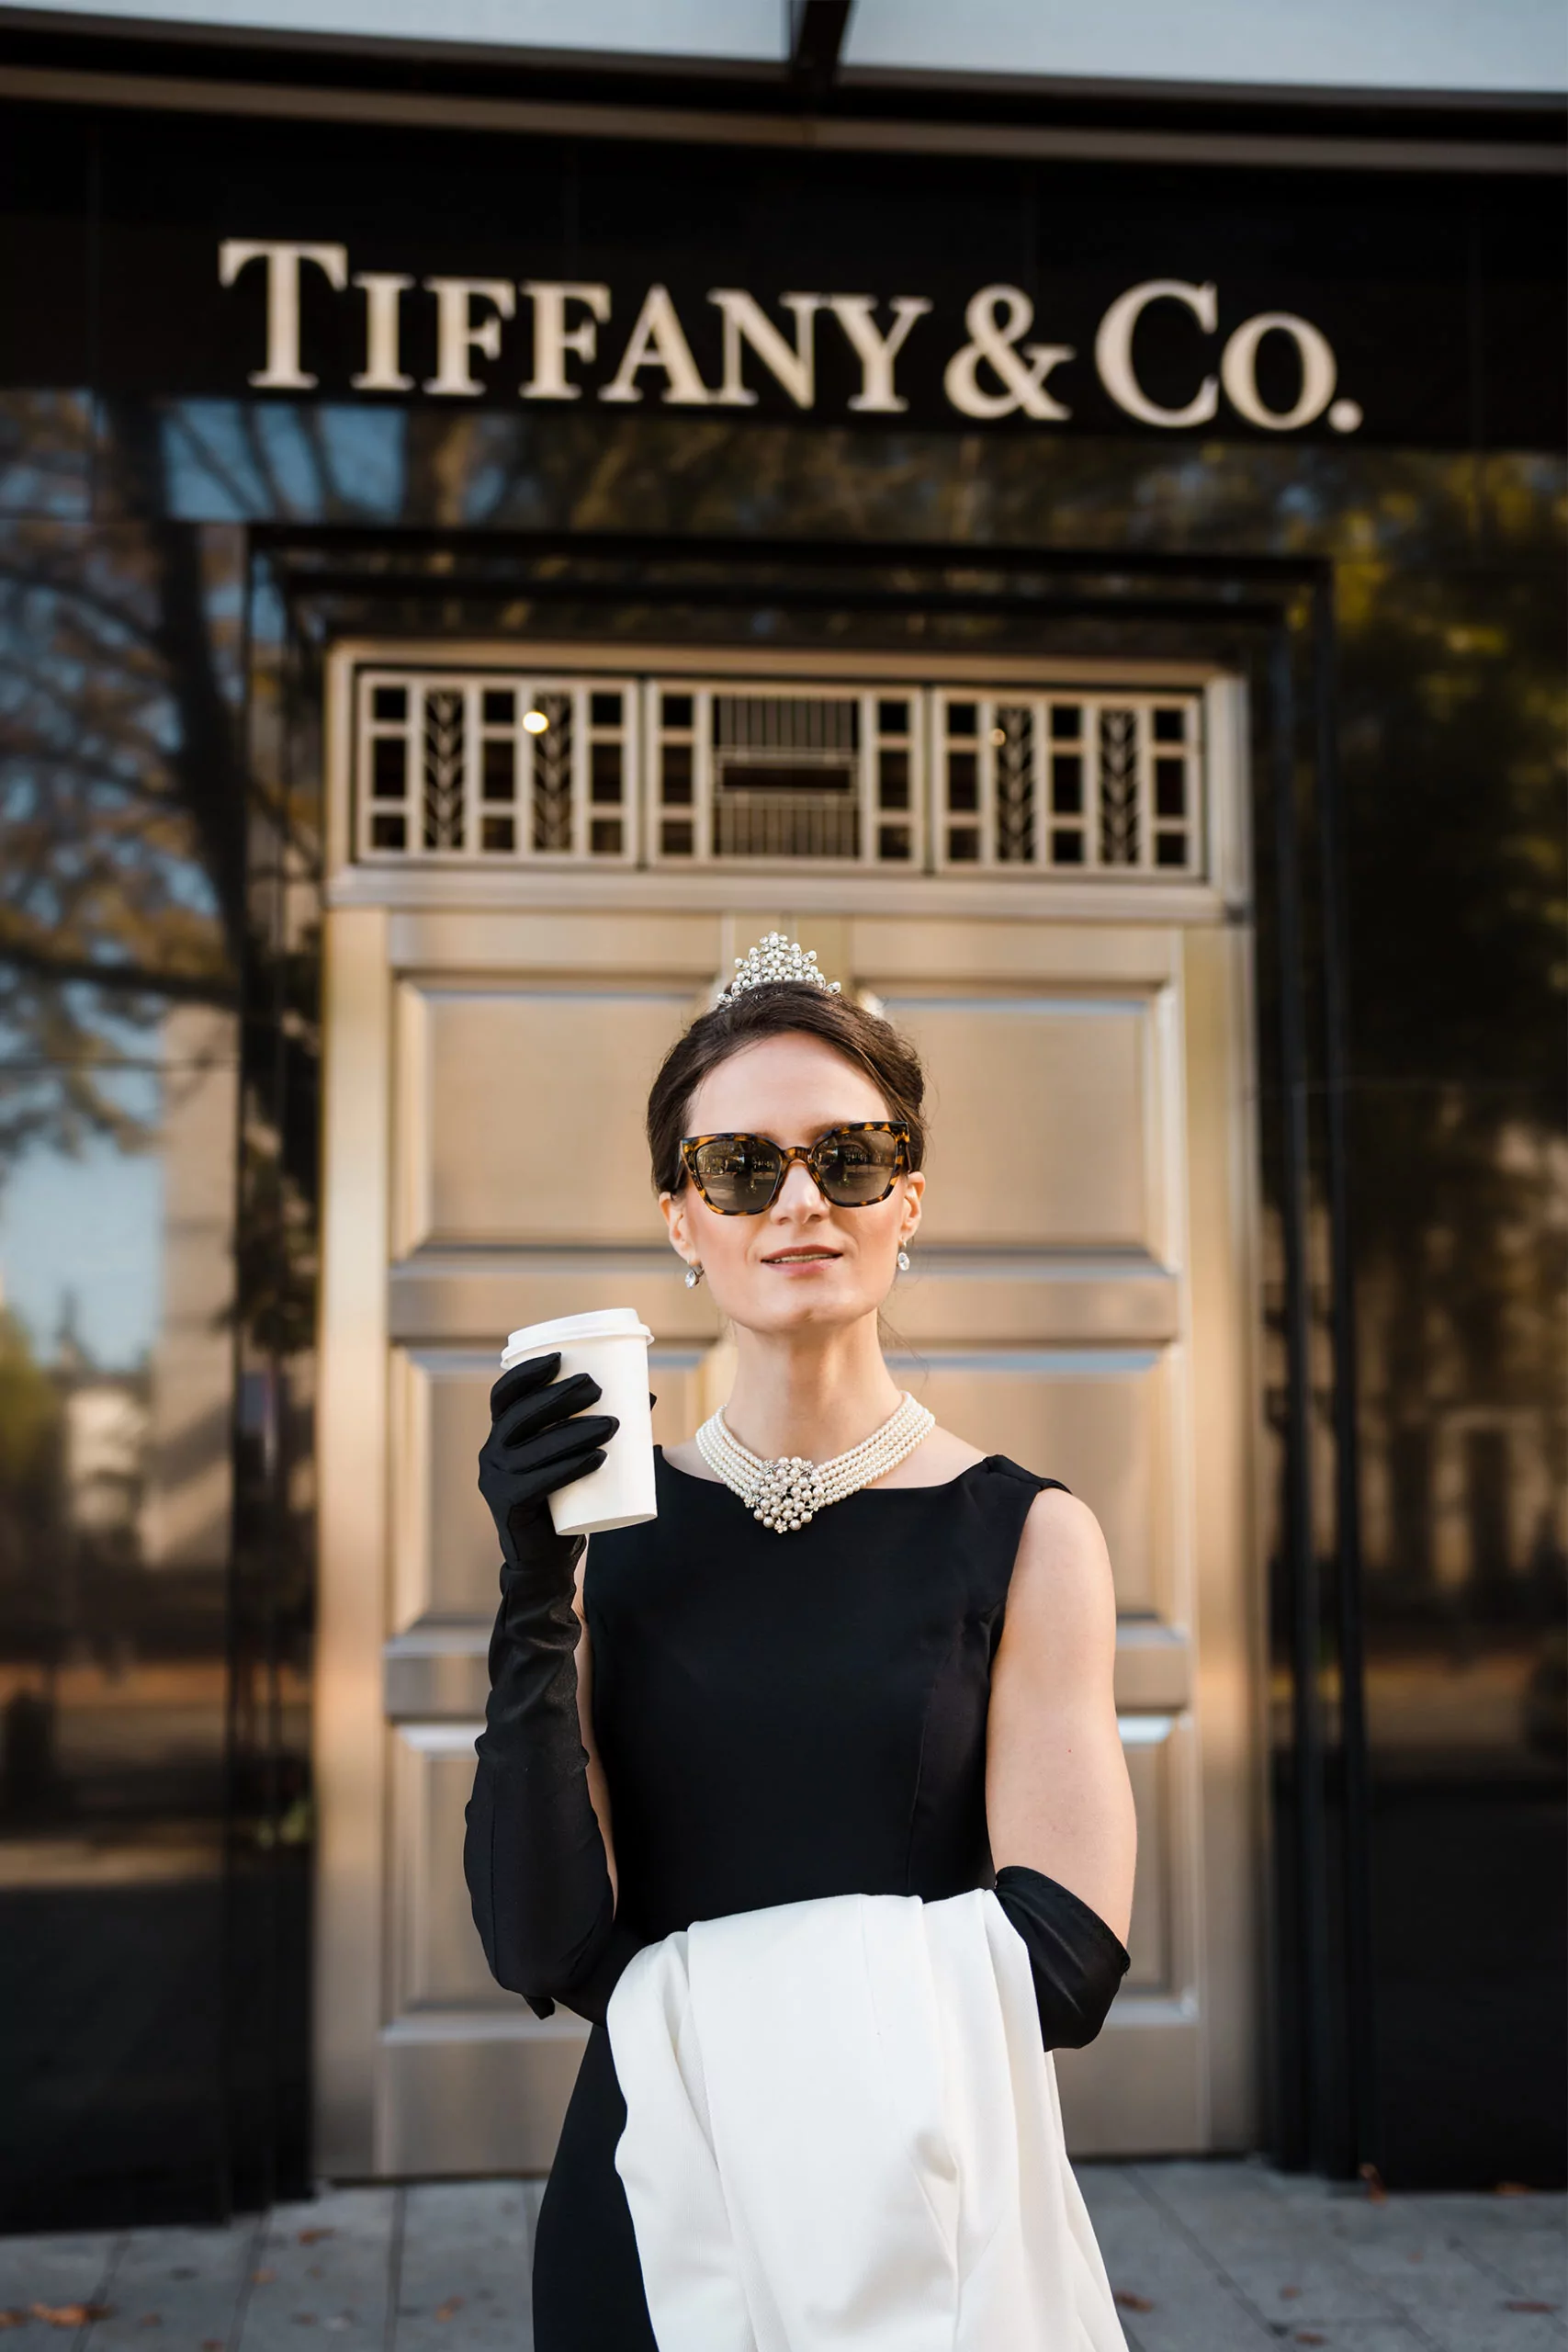 Holly Golightly costume